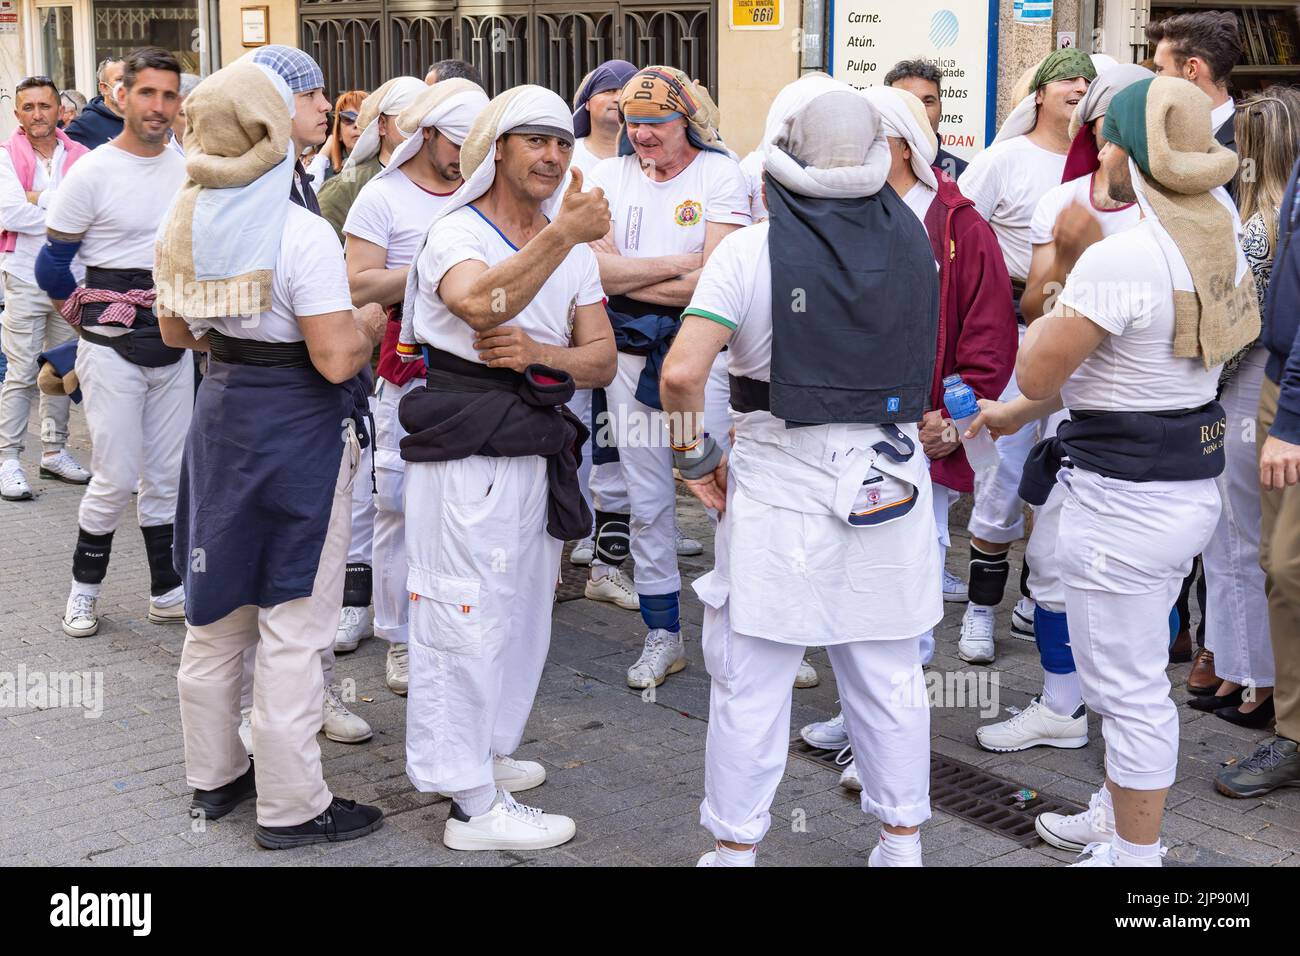 Huelva, Spain - April 10, 2022: A group of costalero bearers with the Costal (Sack) Piece of cloth that bearers place on their head and neck to better Stock Photo